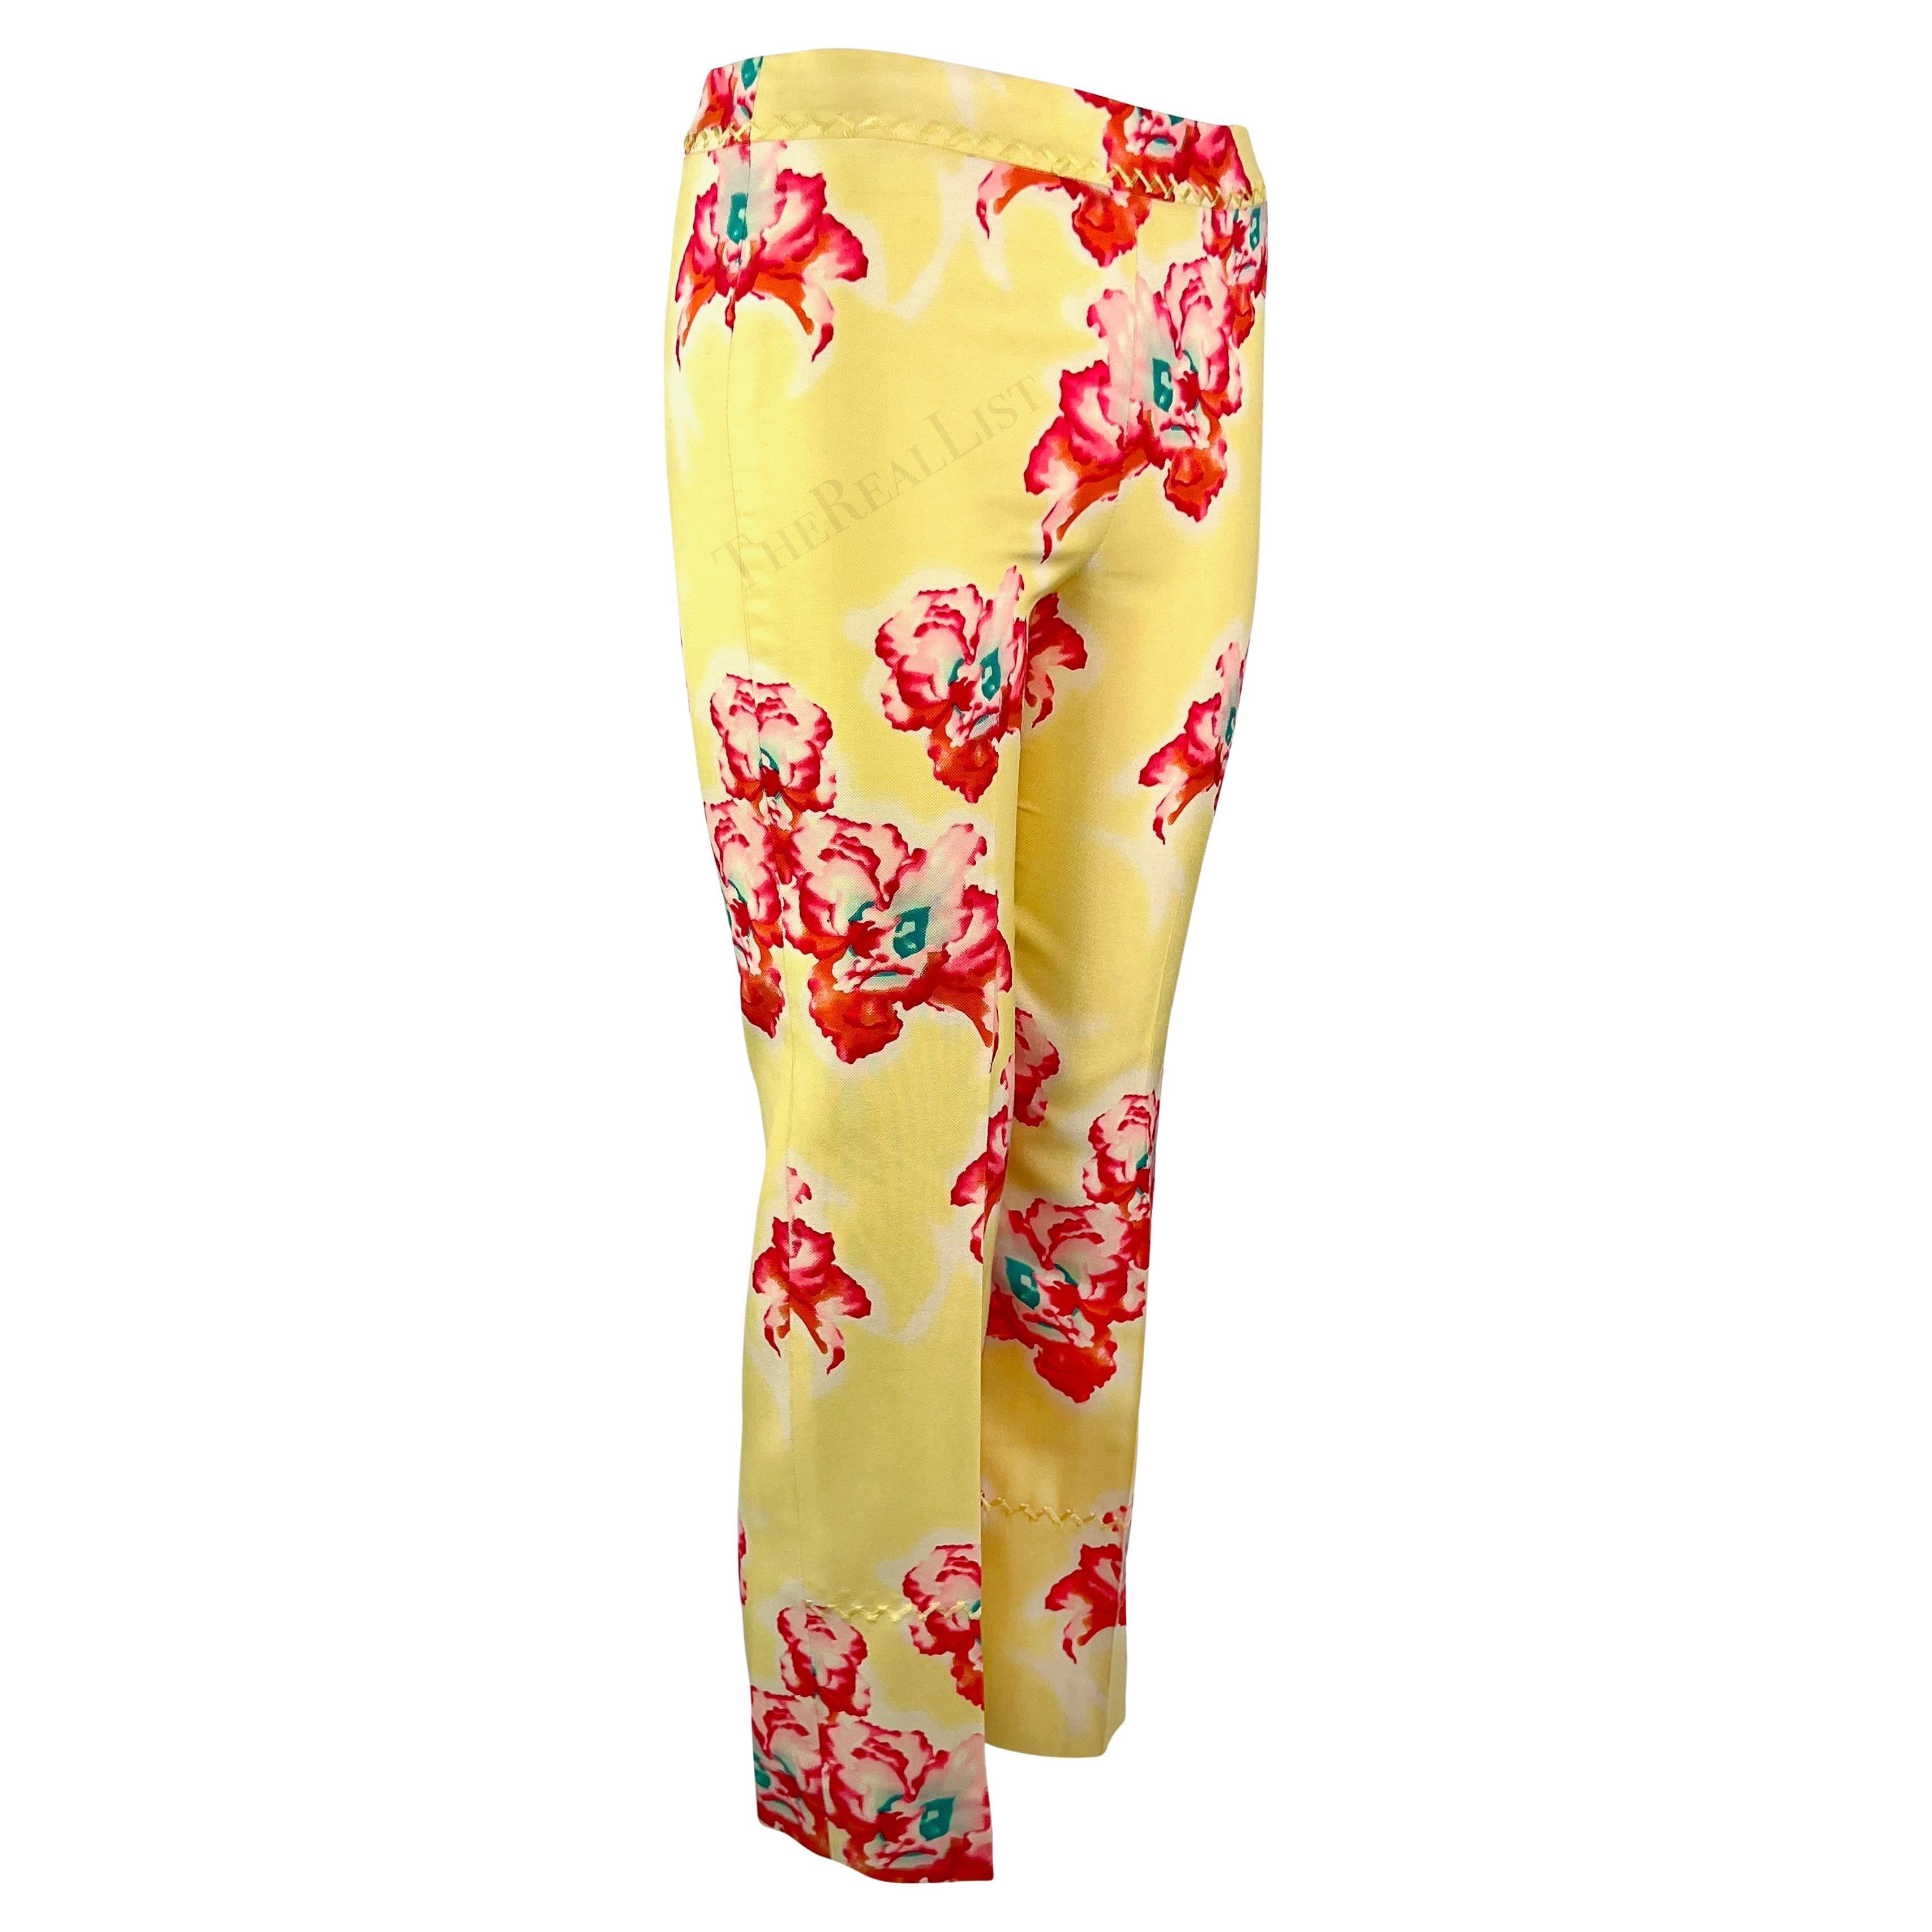 S/S 1999 Gianni Versace by Donatella Pink Yellow Orchid Print Silk Cropped Pants For Sale 5